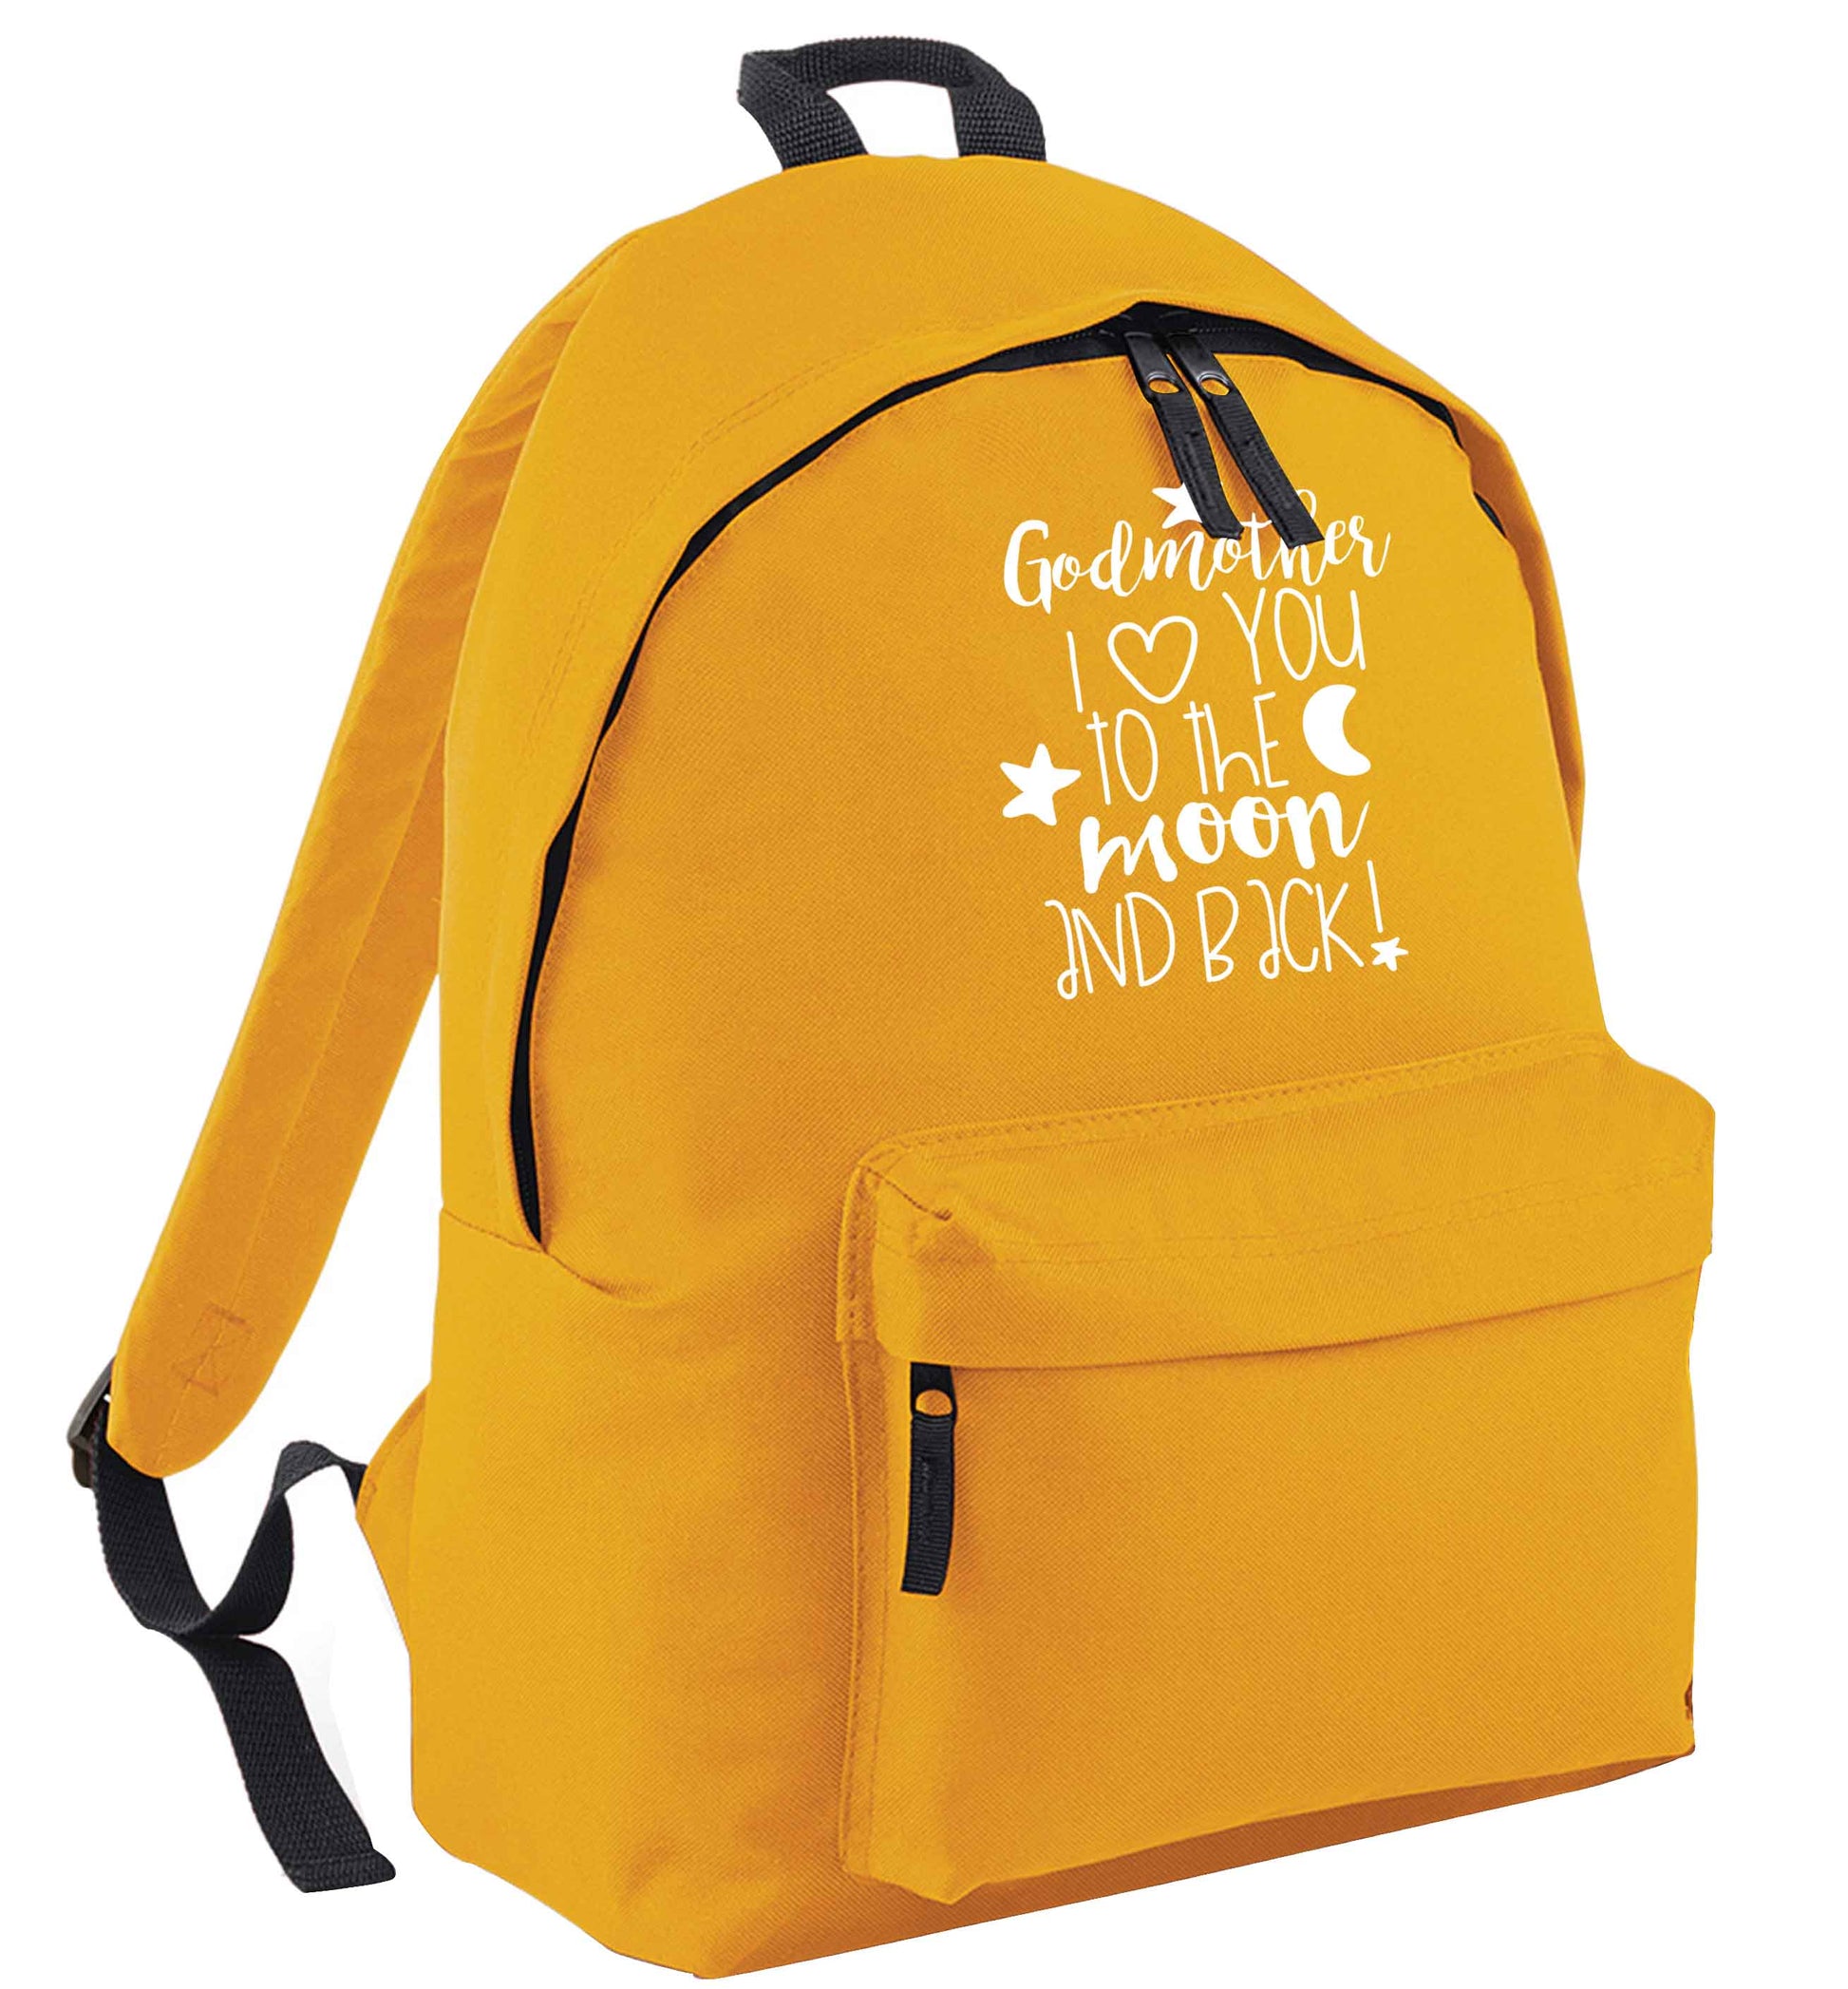 Godmother I love you to the moon and back mustard adults backpack